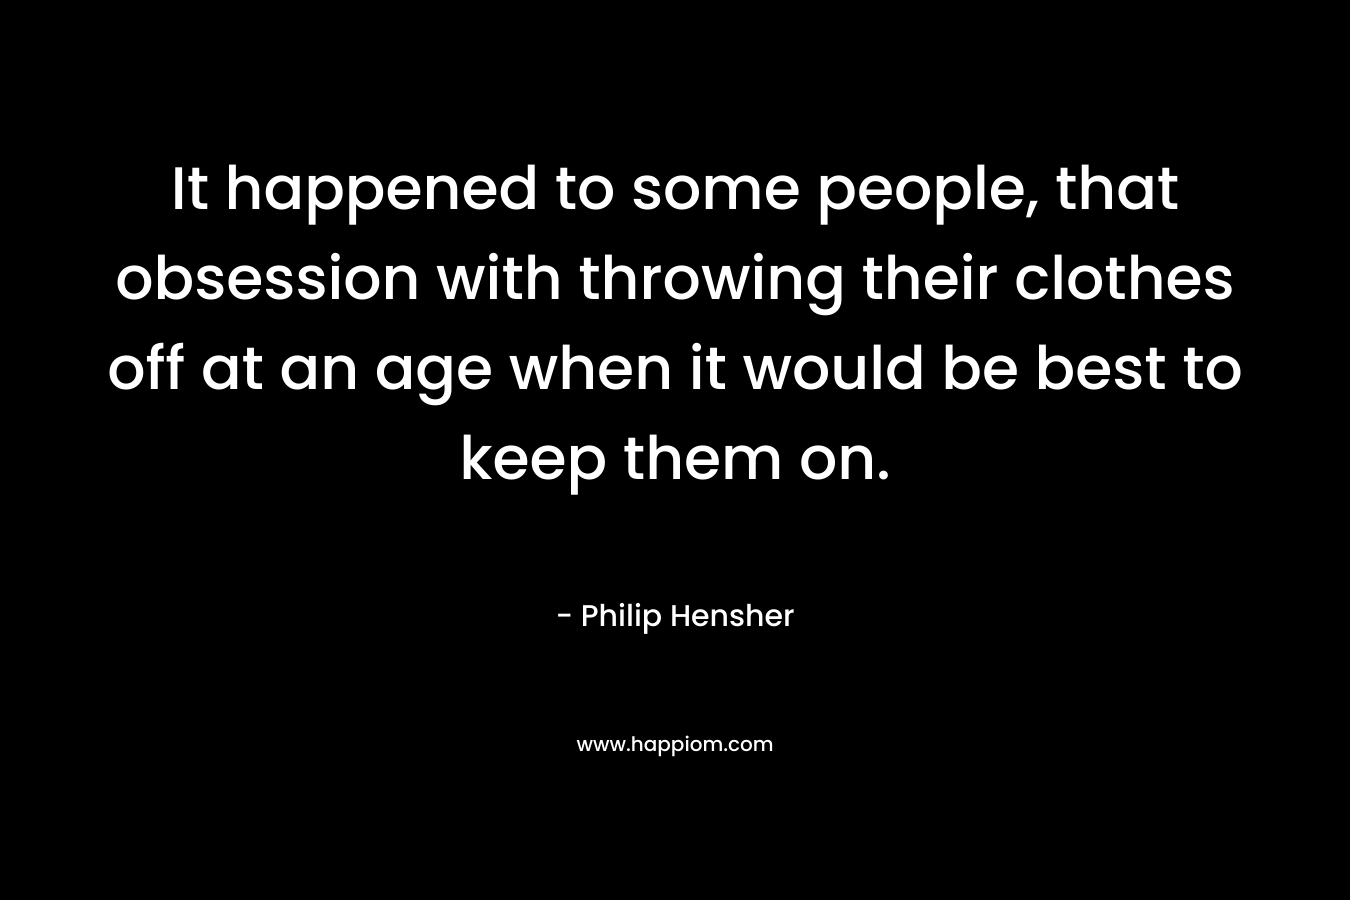 It happened to some people, that obsession with throwing their clothes off at an age when it would be best to keep them on. – Philip Hensher